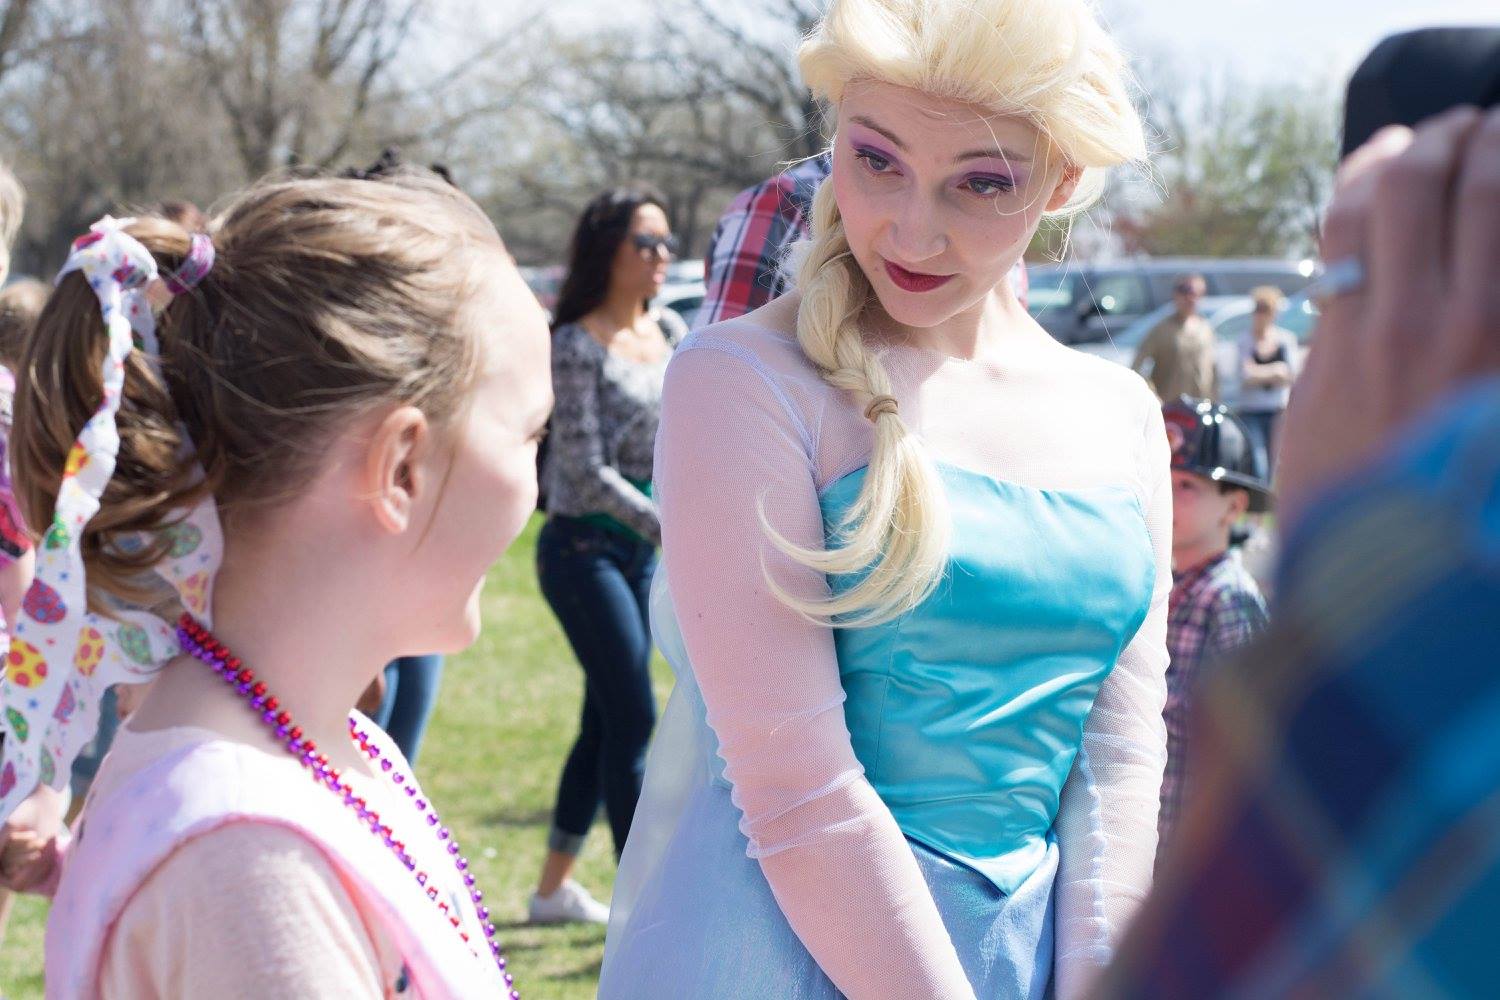 PHOTO: Mackenzie Moretter, turning 10 on April 21, 2015, is pictured here with an Elsa from "Frozen" mascot from Valleyfair Family Amusement Park at her birthday party in Shakopee, Minn., on April 18, 2015.